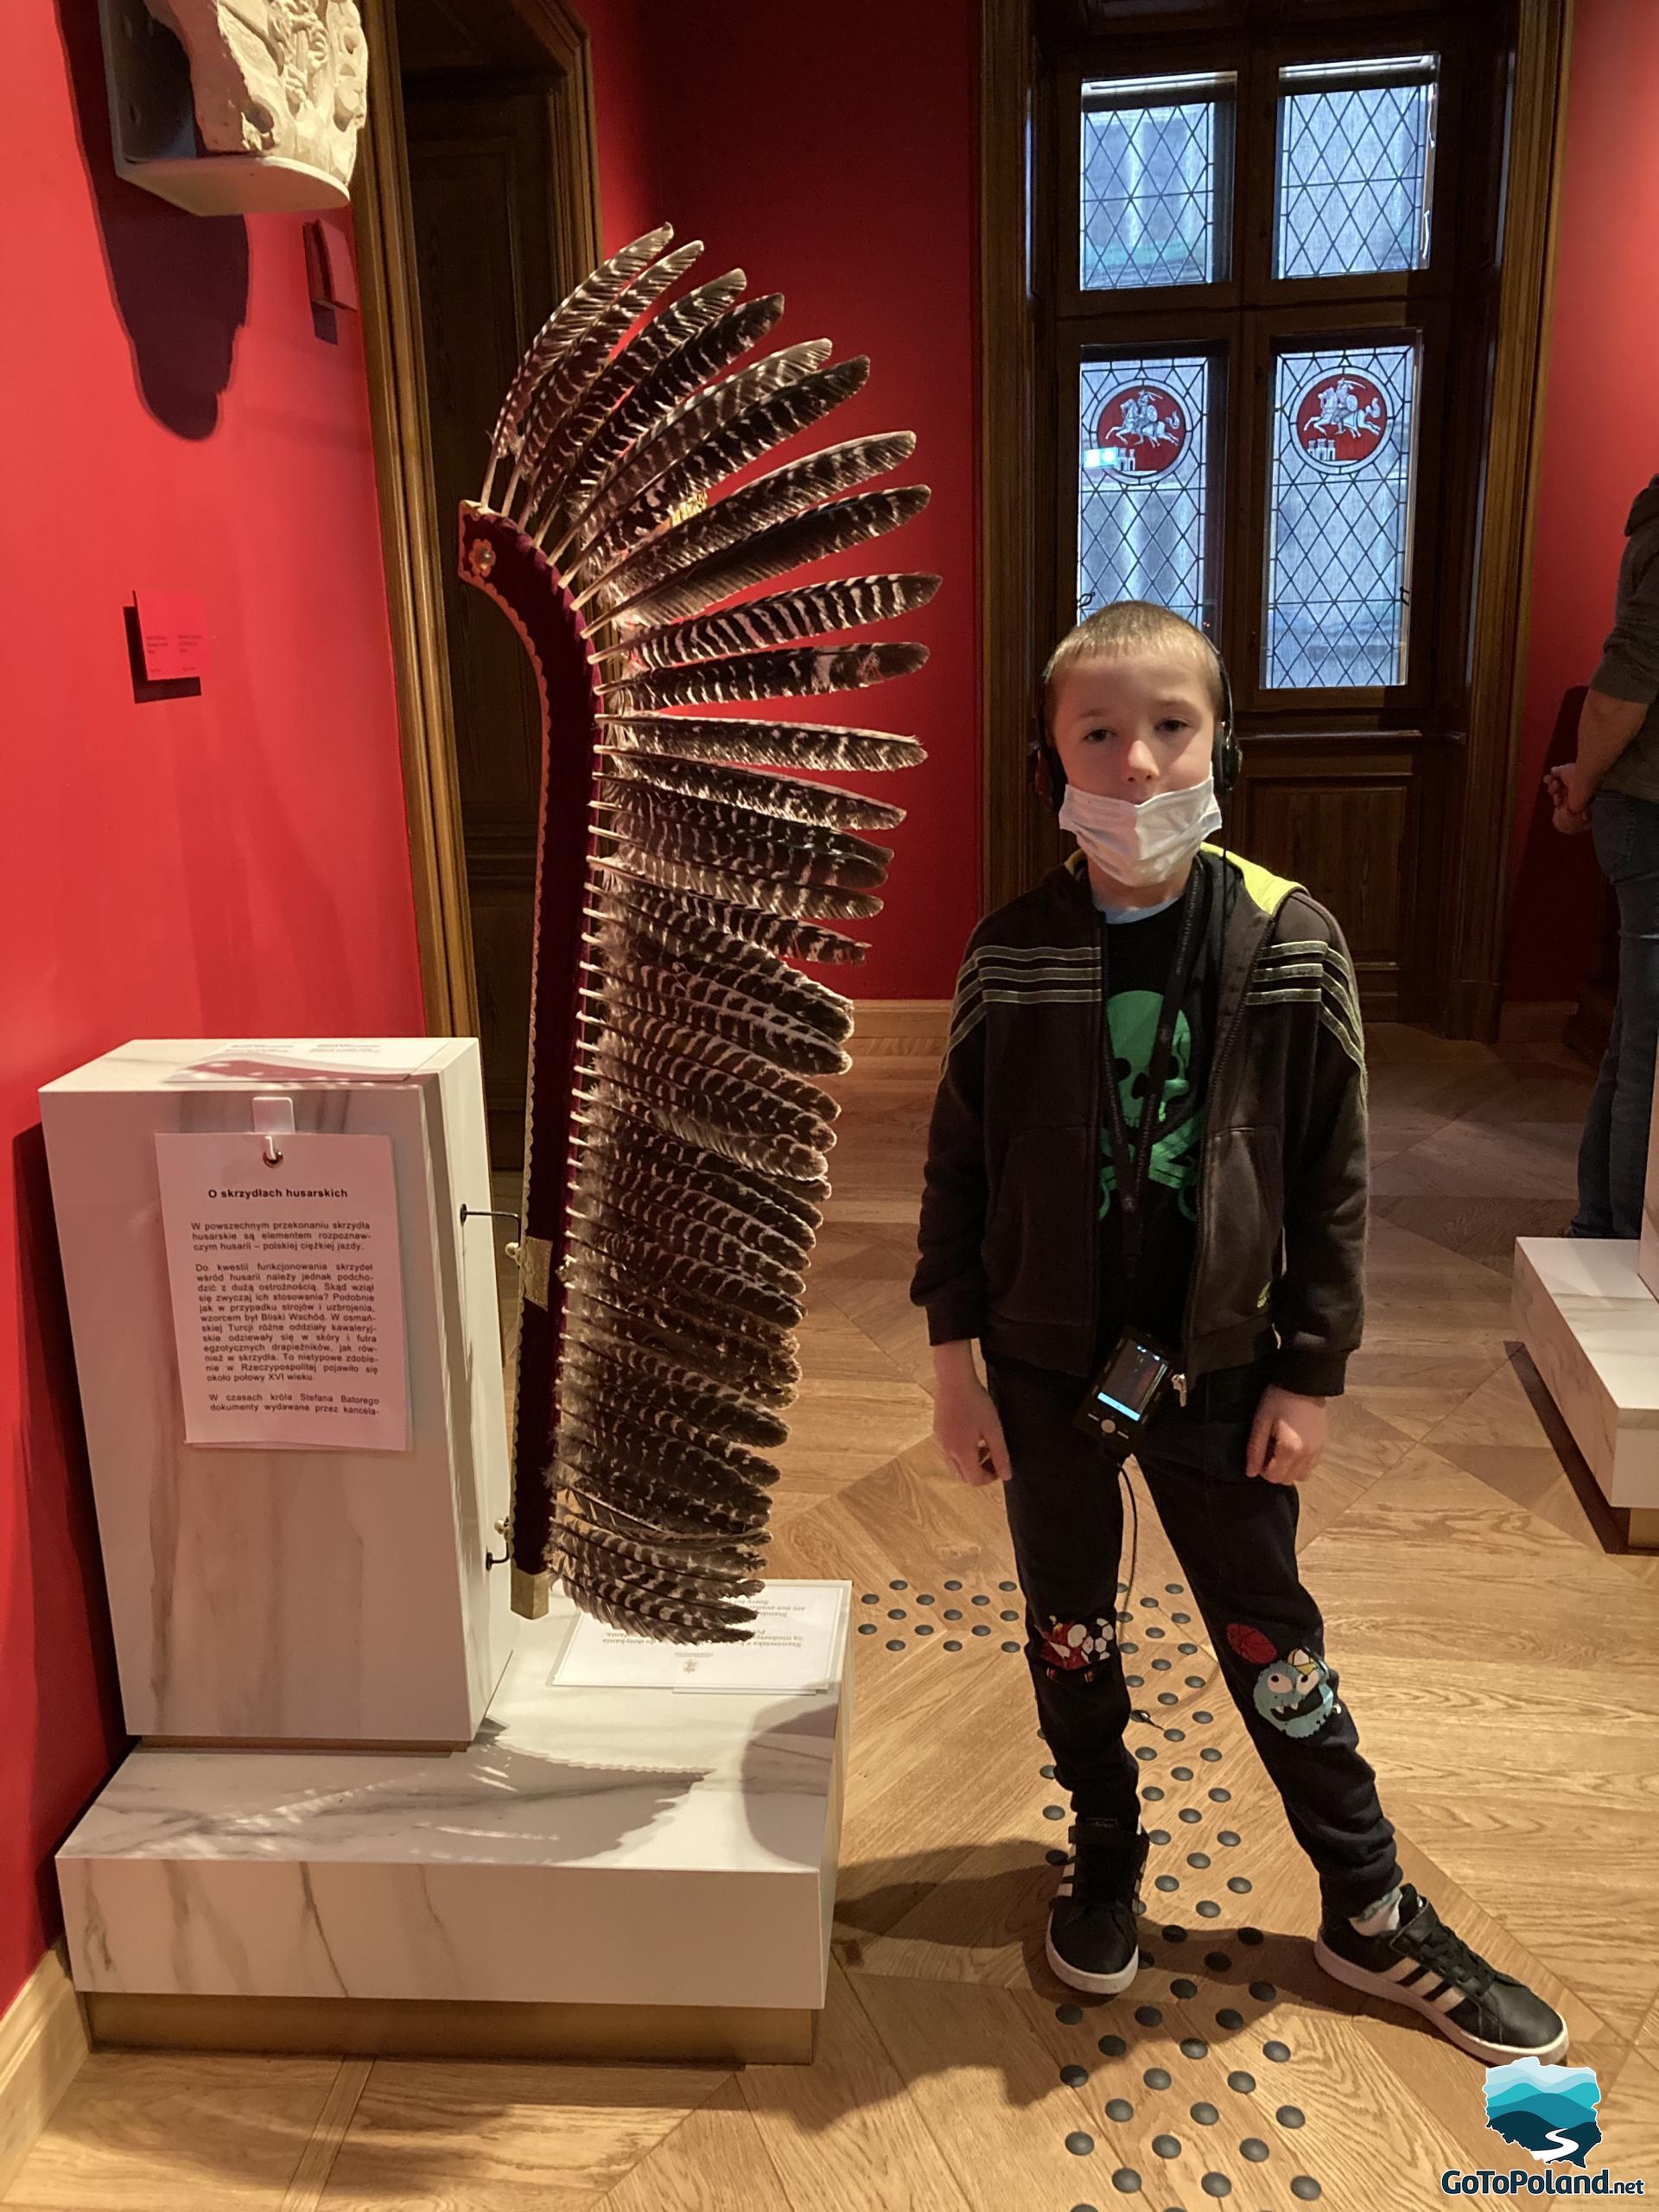 A boy is standing by an old piece of armor. It is a hussar wing with feathers